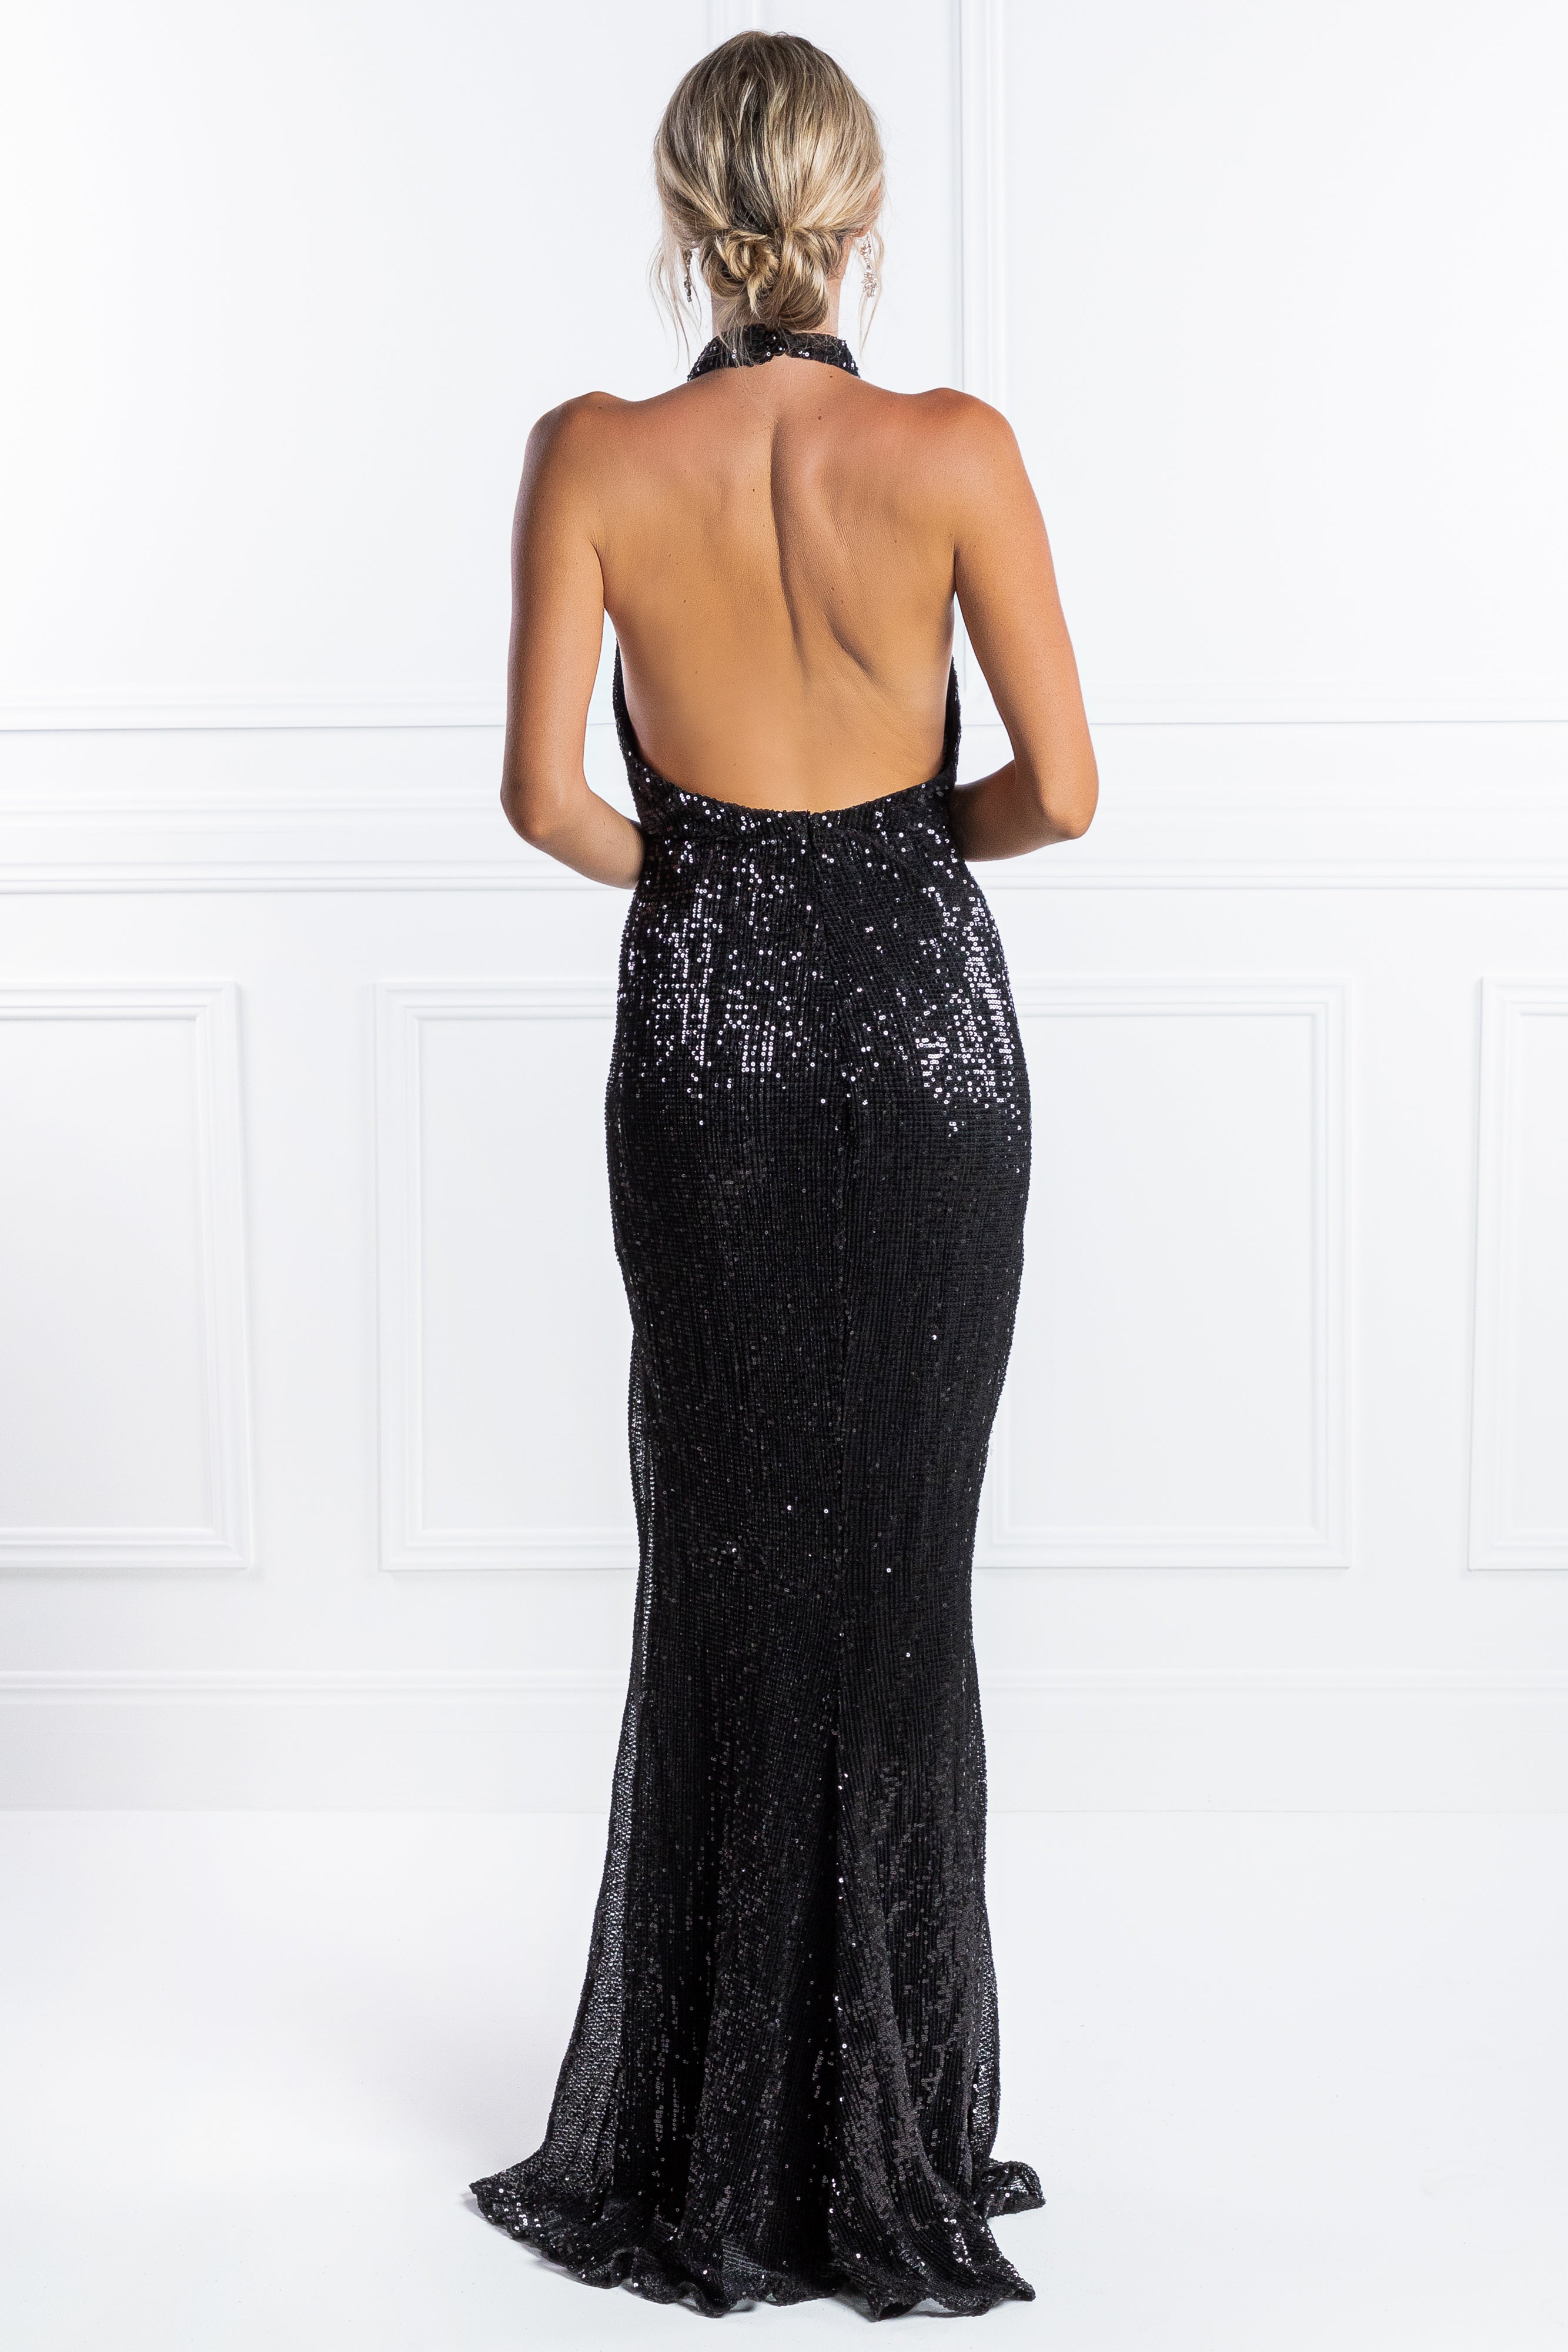 Honey Couture OAKLEY Black Sequin Halter Formal Gown Dress Honey Couture$ AfterPay Humm ZipPay LayBuy Sezzle